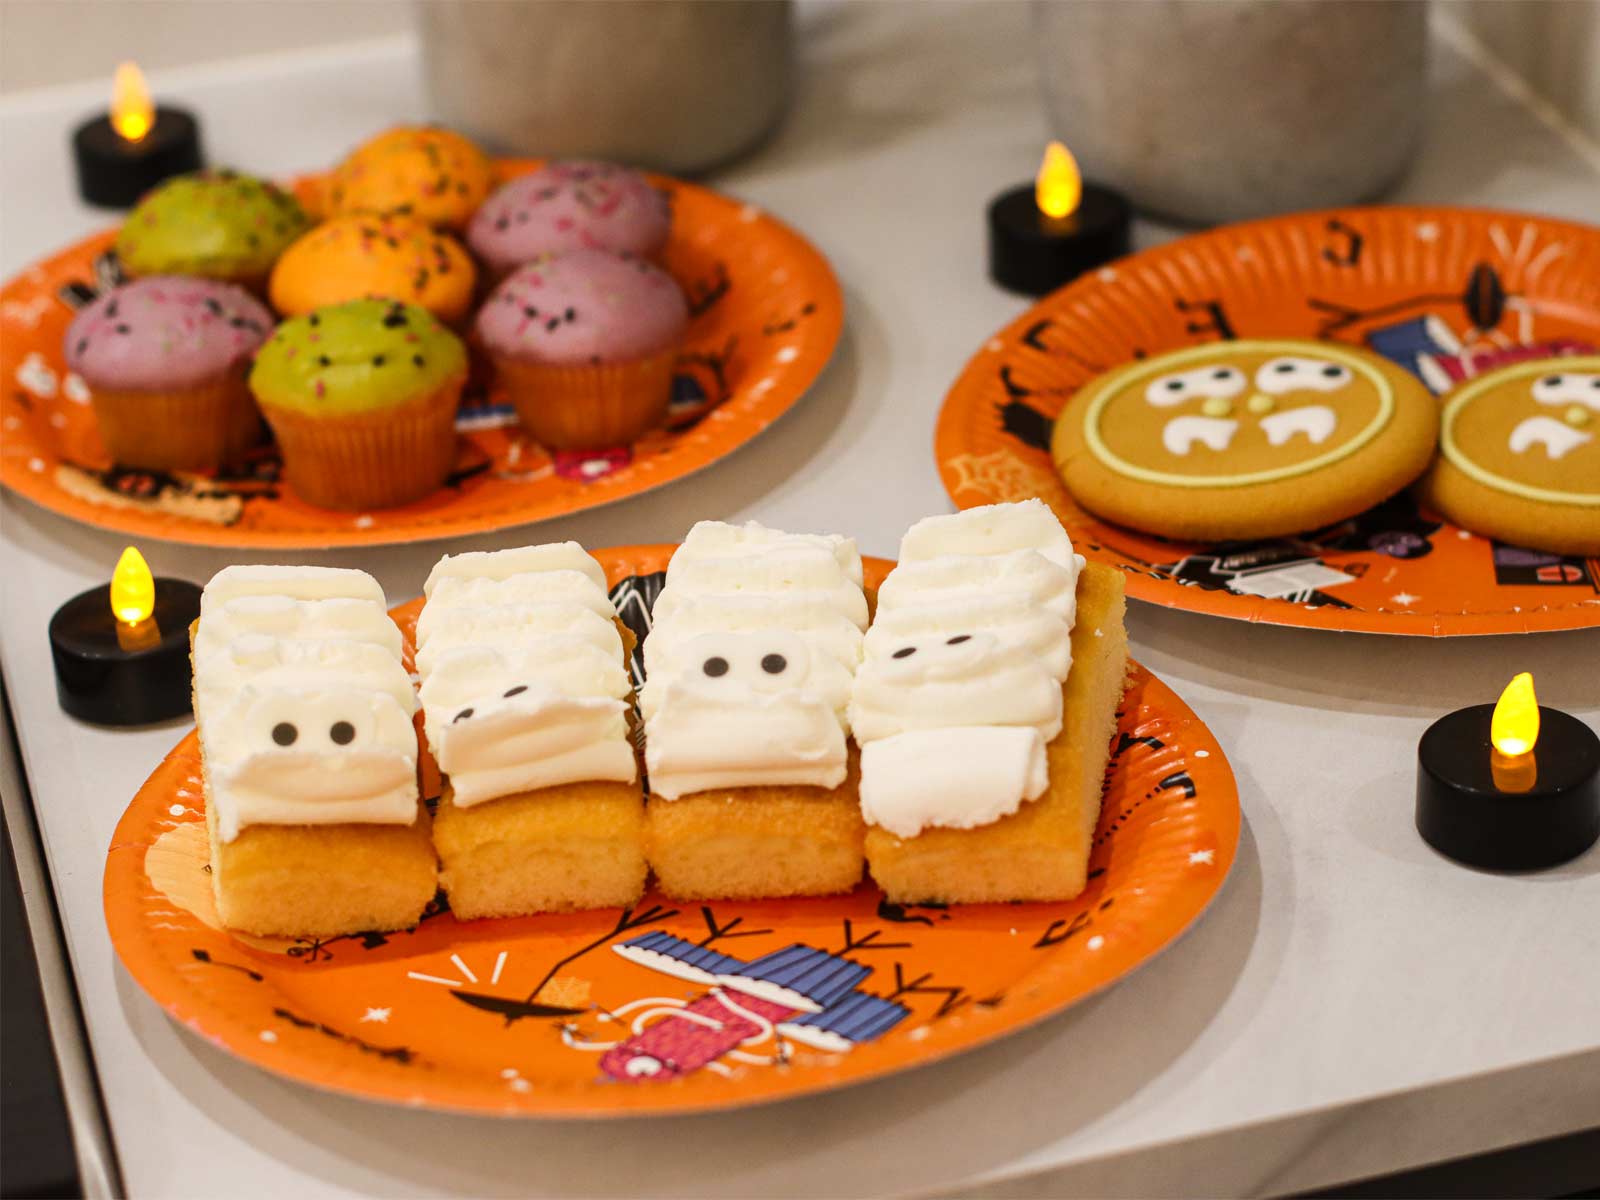 Halloween party treats for kids, including cupcakes and biscuits